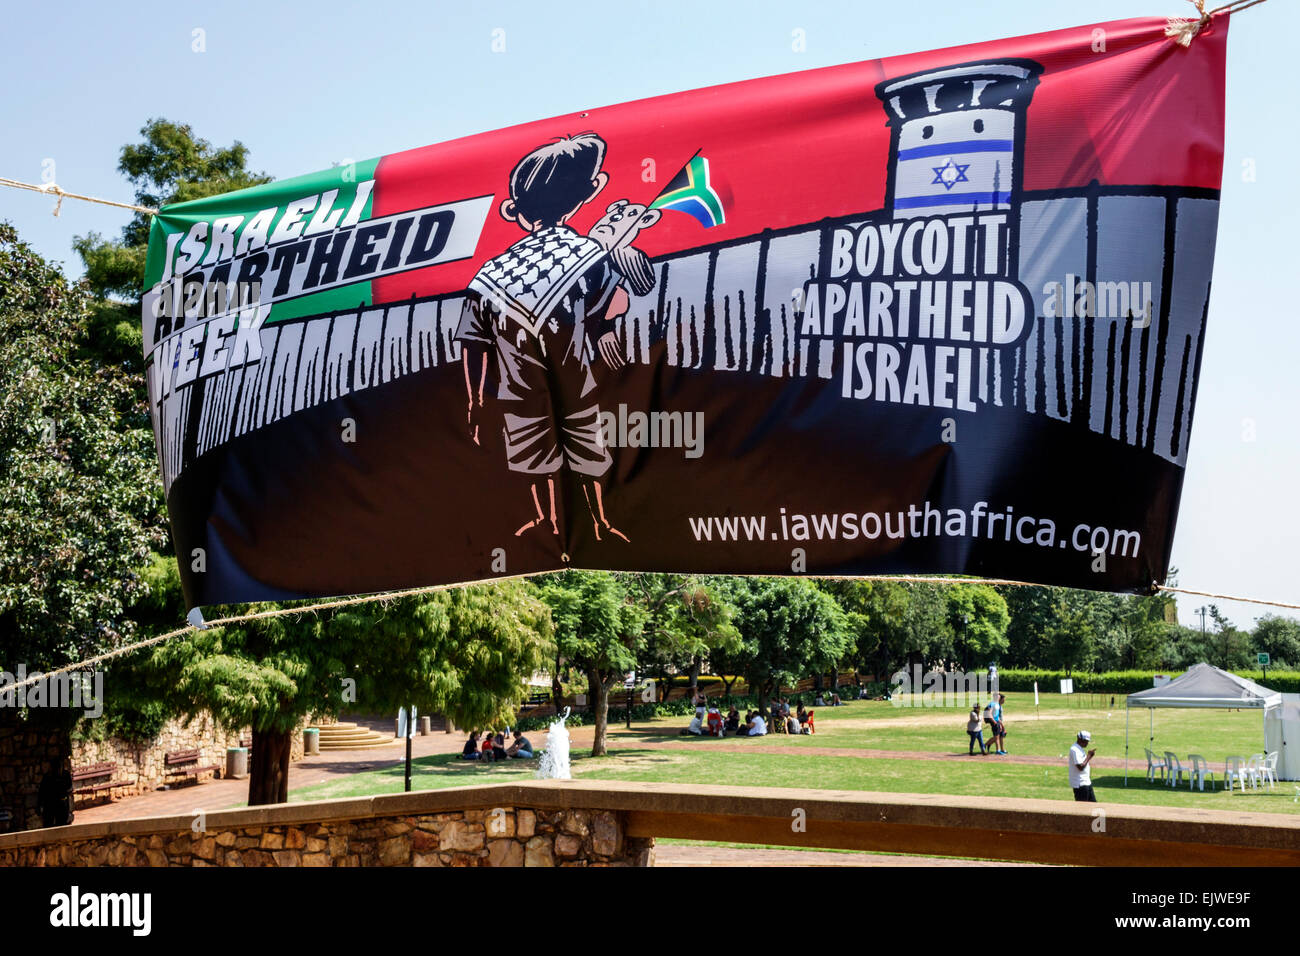 Johannesburg South Africa,Braamfontein,Wits University,University of the Witwatersrand,higher education,East Campus,banner,protest,political,Israeli A Stock Photo